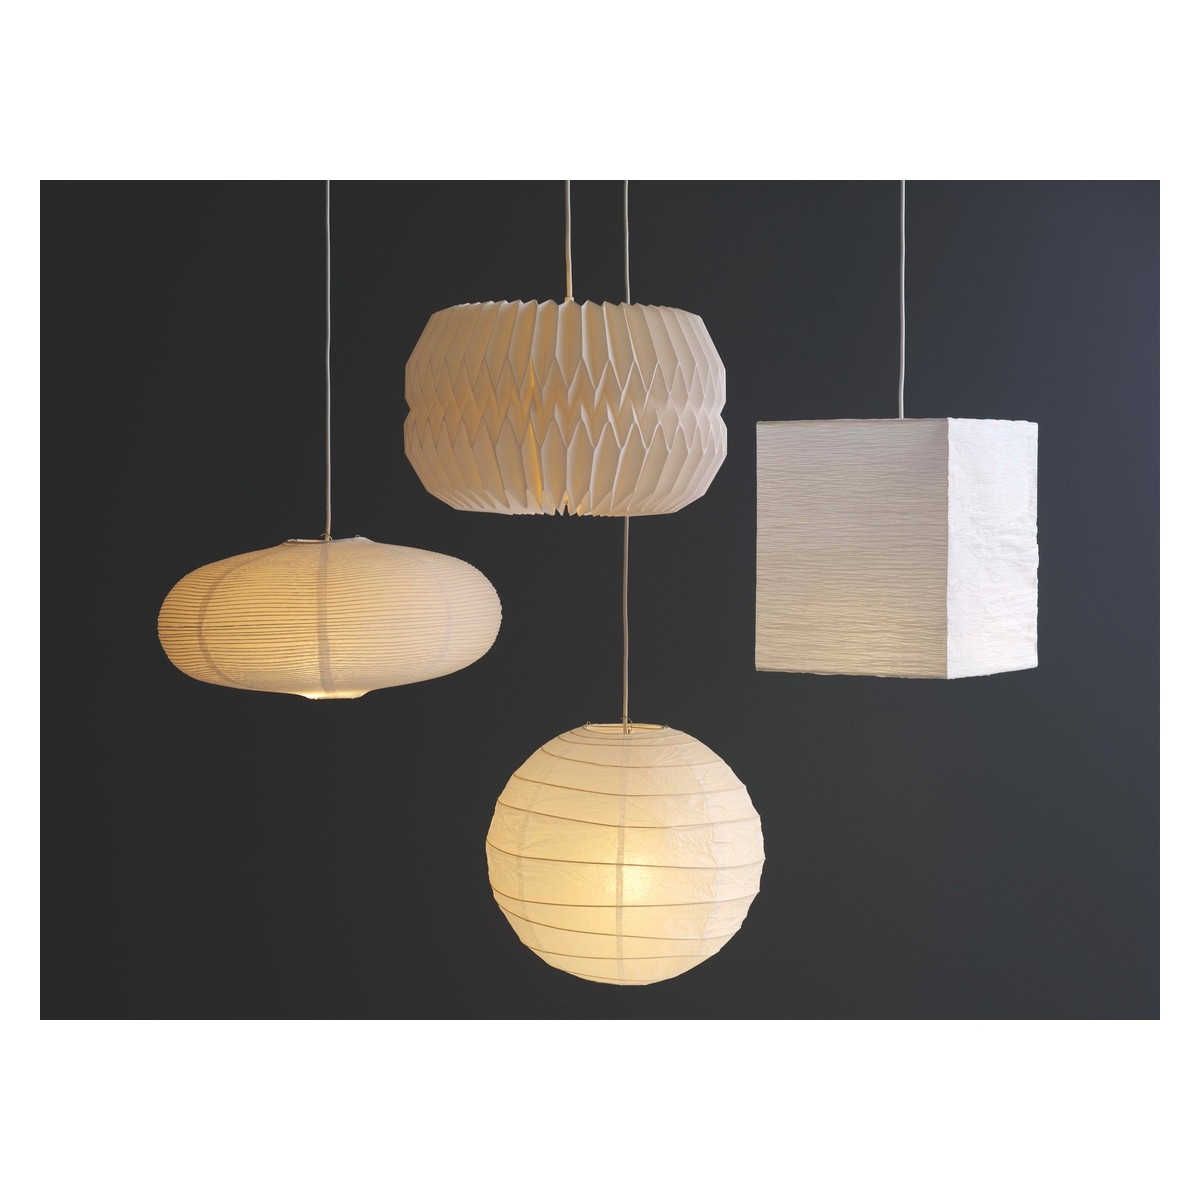 Permalink to Large Paper Ceiling Light Shades